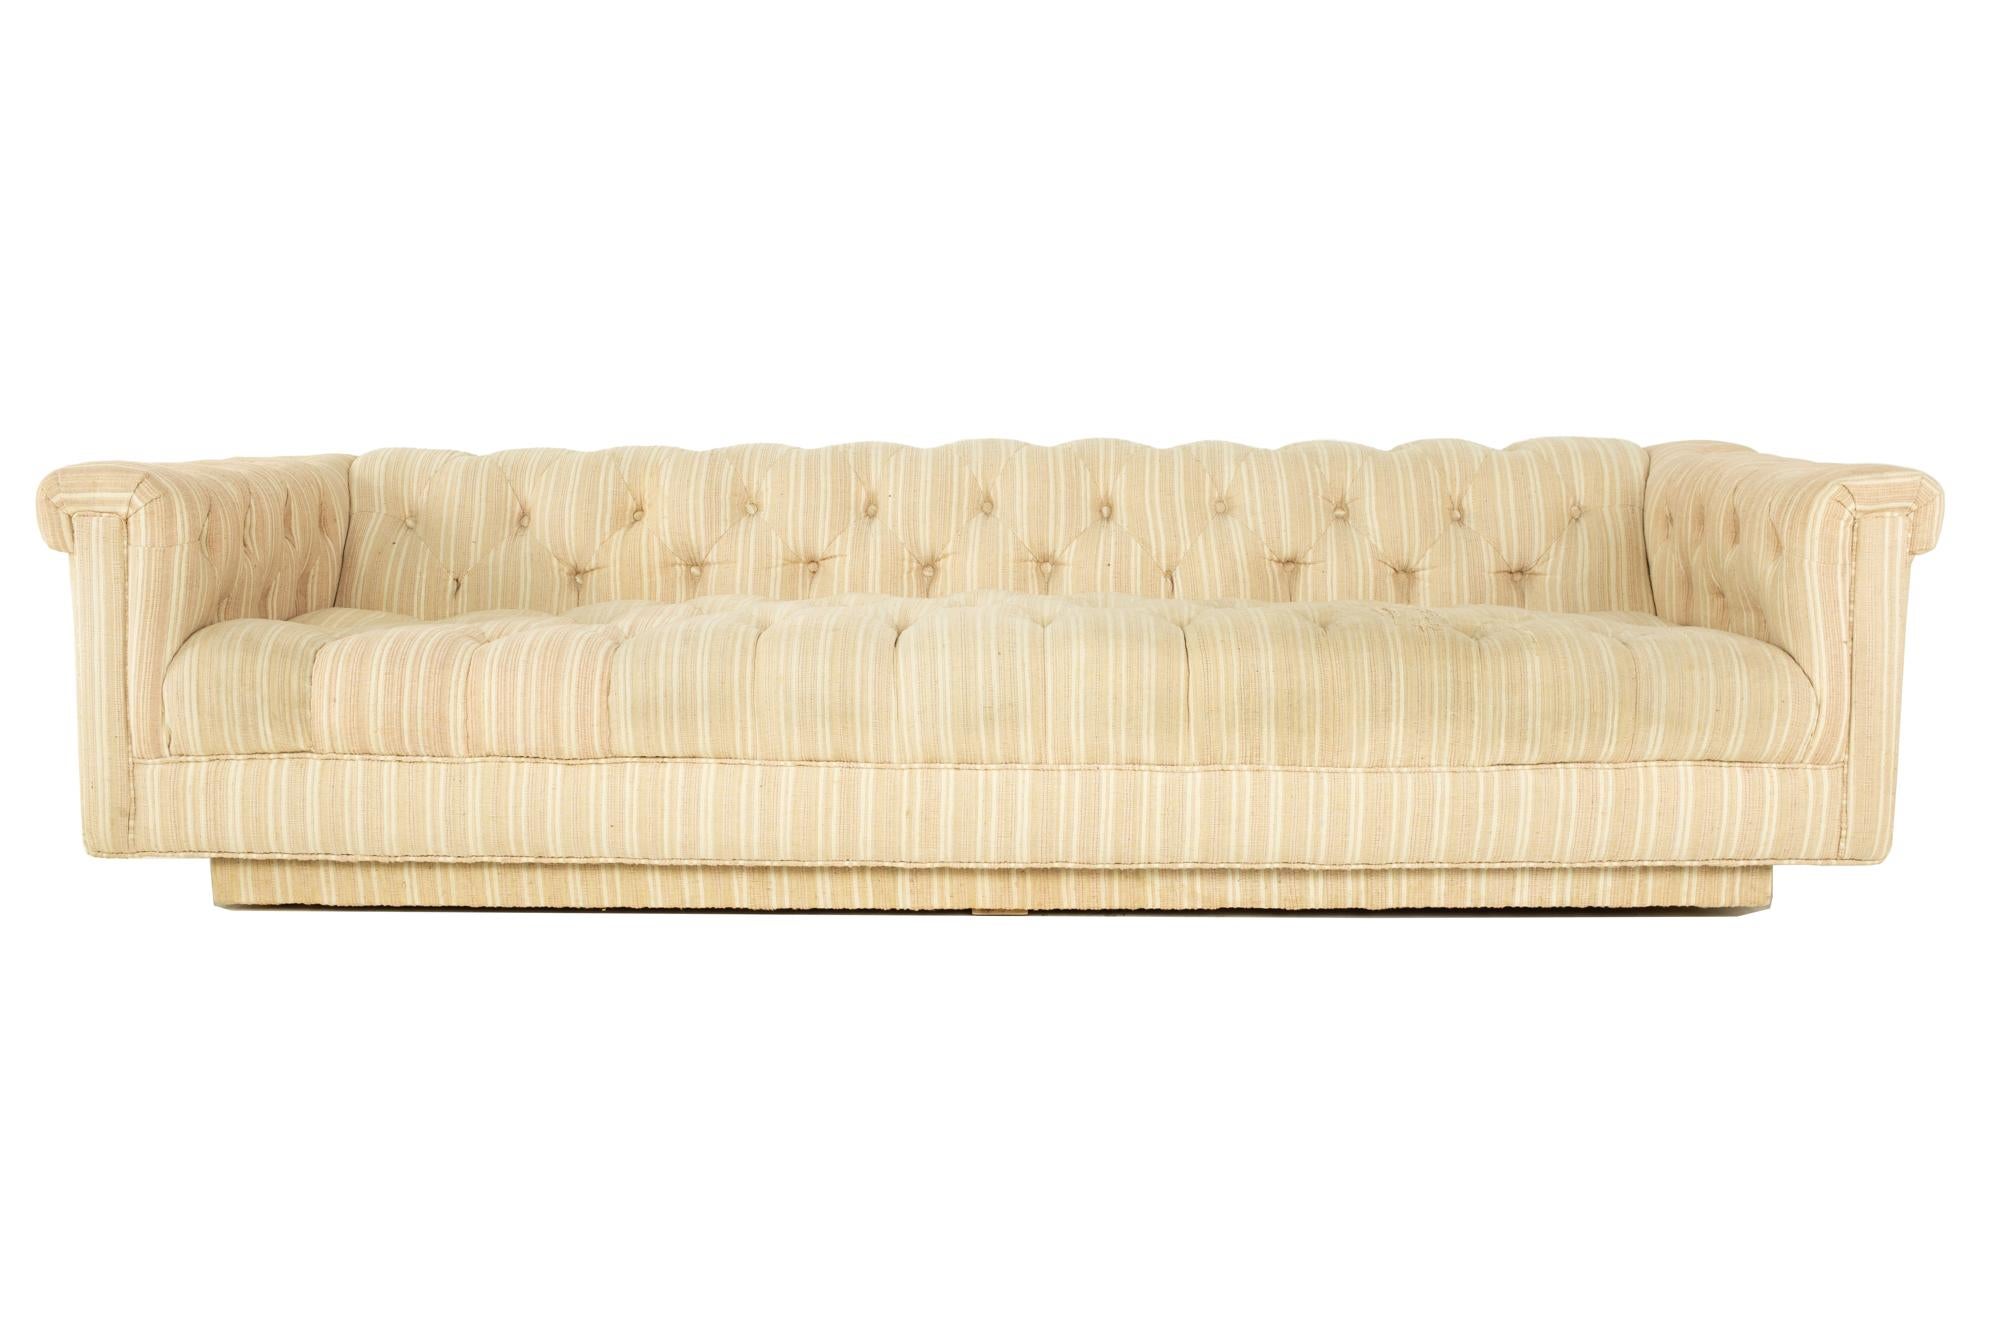 Edward Wormley for Dunbar mid century tufted chesterfield party sofa

This sofa measures 102 wide x 36 deep x 24.5 high, with a seat height of 16 inches and arm rest height of 24.5 inches

All pieces of furniture can be had in what we call restored